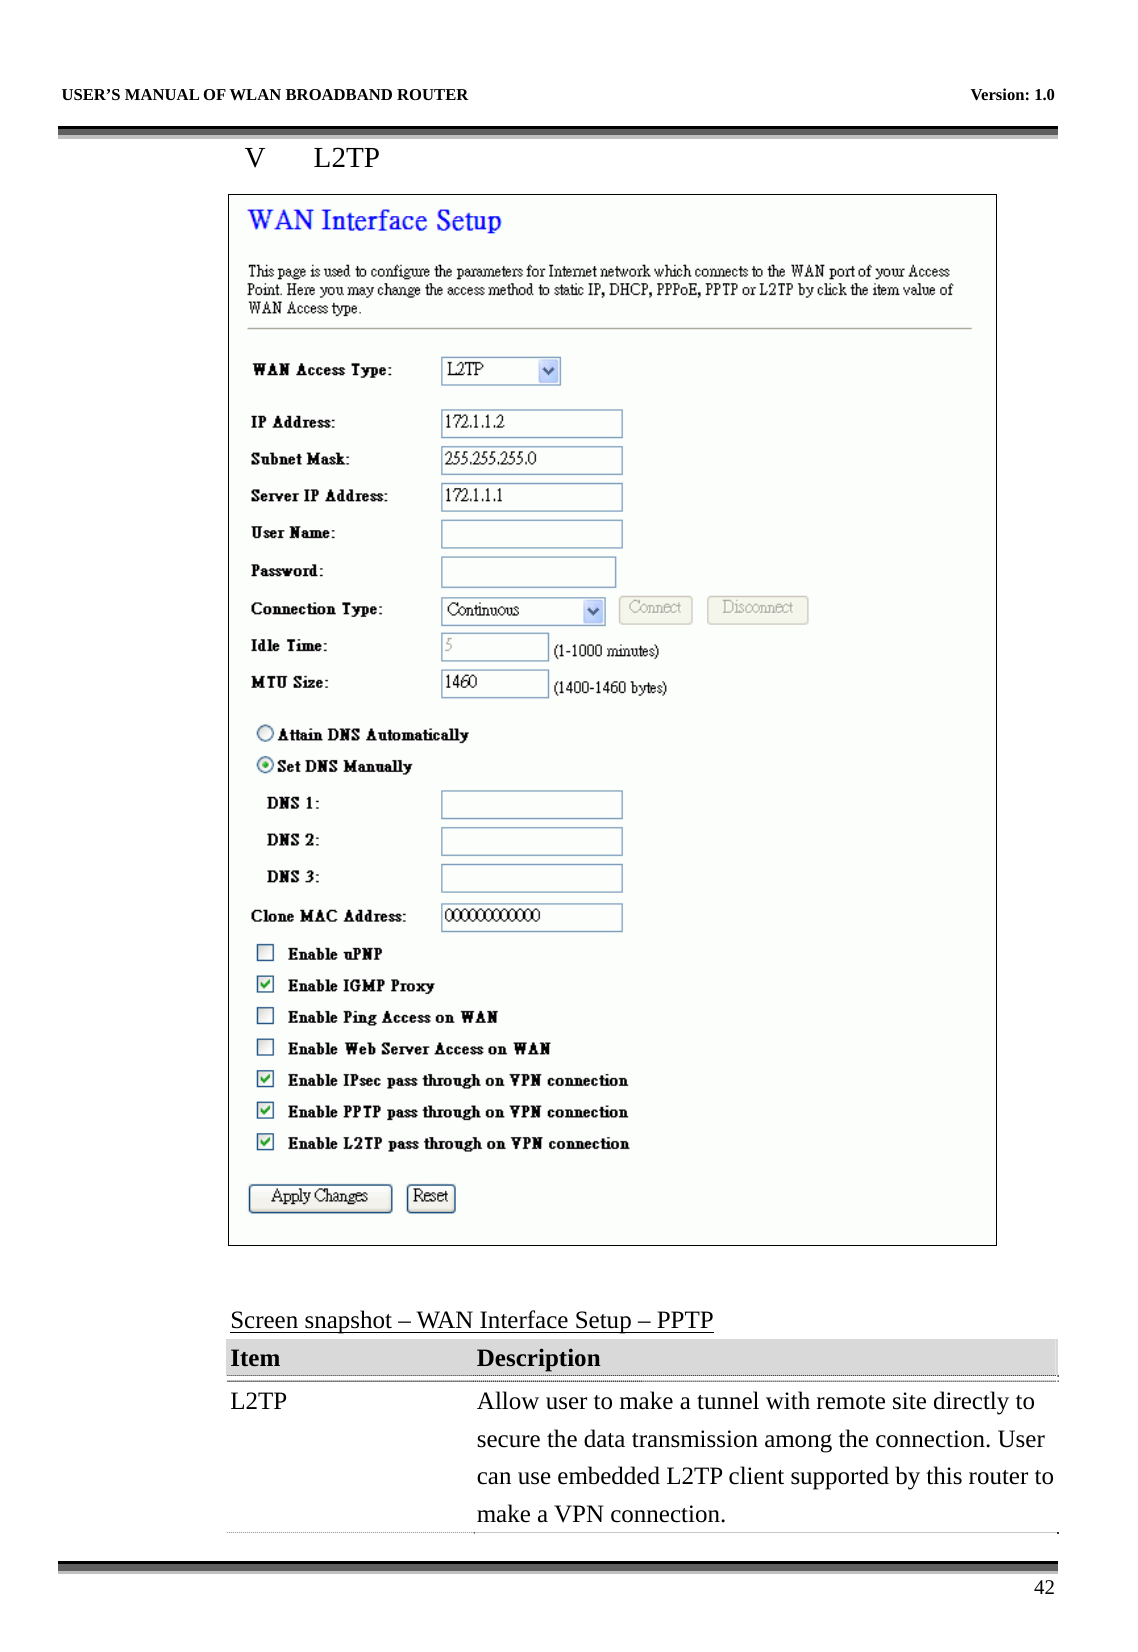   USER’S MANUAL OF WLAN BROADBAND ROUTER    Version: 1.0      42 V L2TP   Screen snapshot – WAN Interface Setup – PPTP Item  Description   L2TP  Allow user to make a tunnel with remote site directly to secure the data transmission among the connection. User can use embedded L2TP client supported by this router to make a VPN connection. 